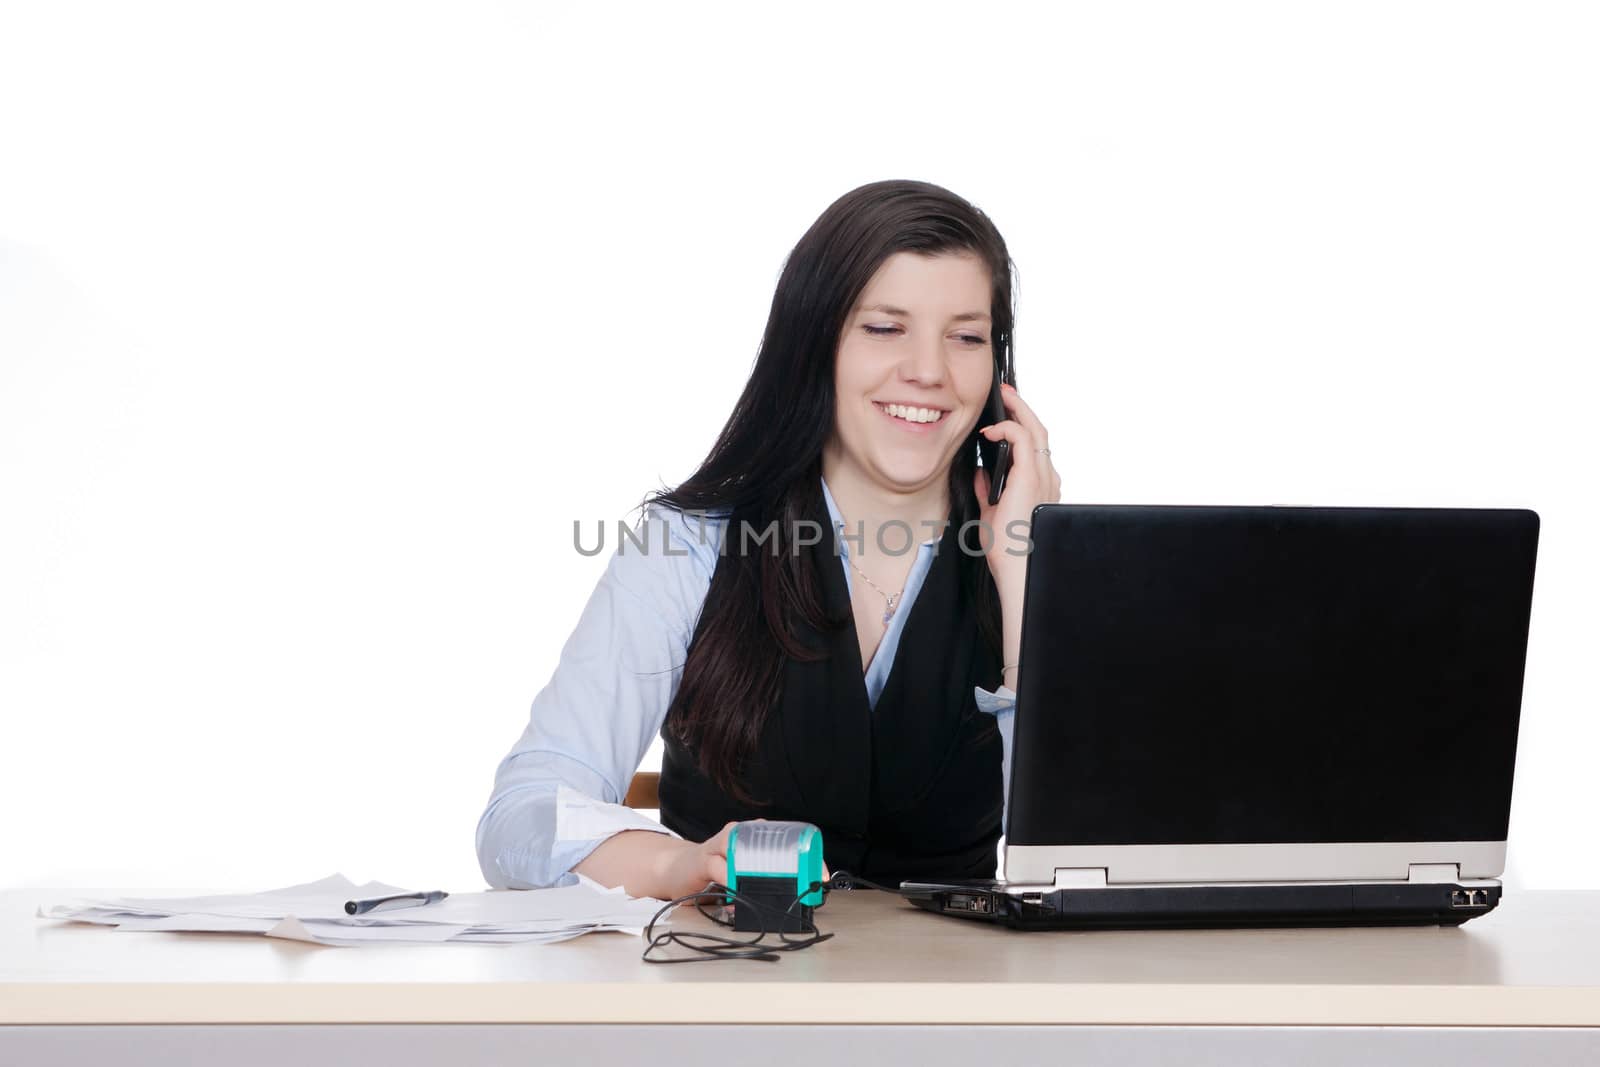 Young woman behind a desk phone and working at laptop, isolated on white background